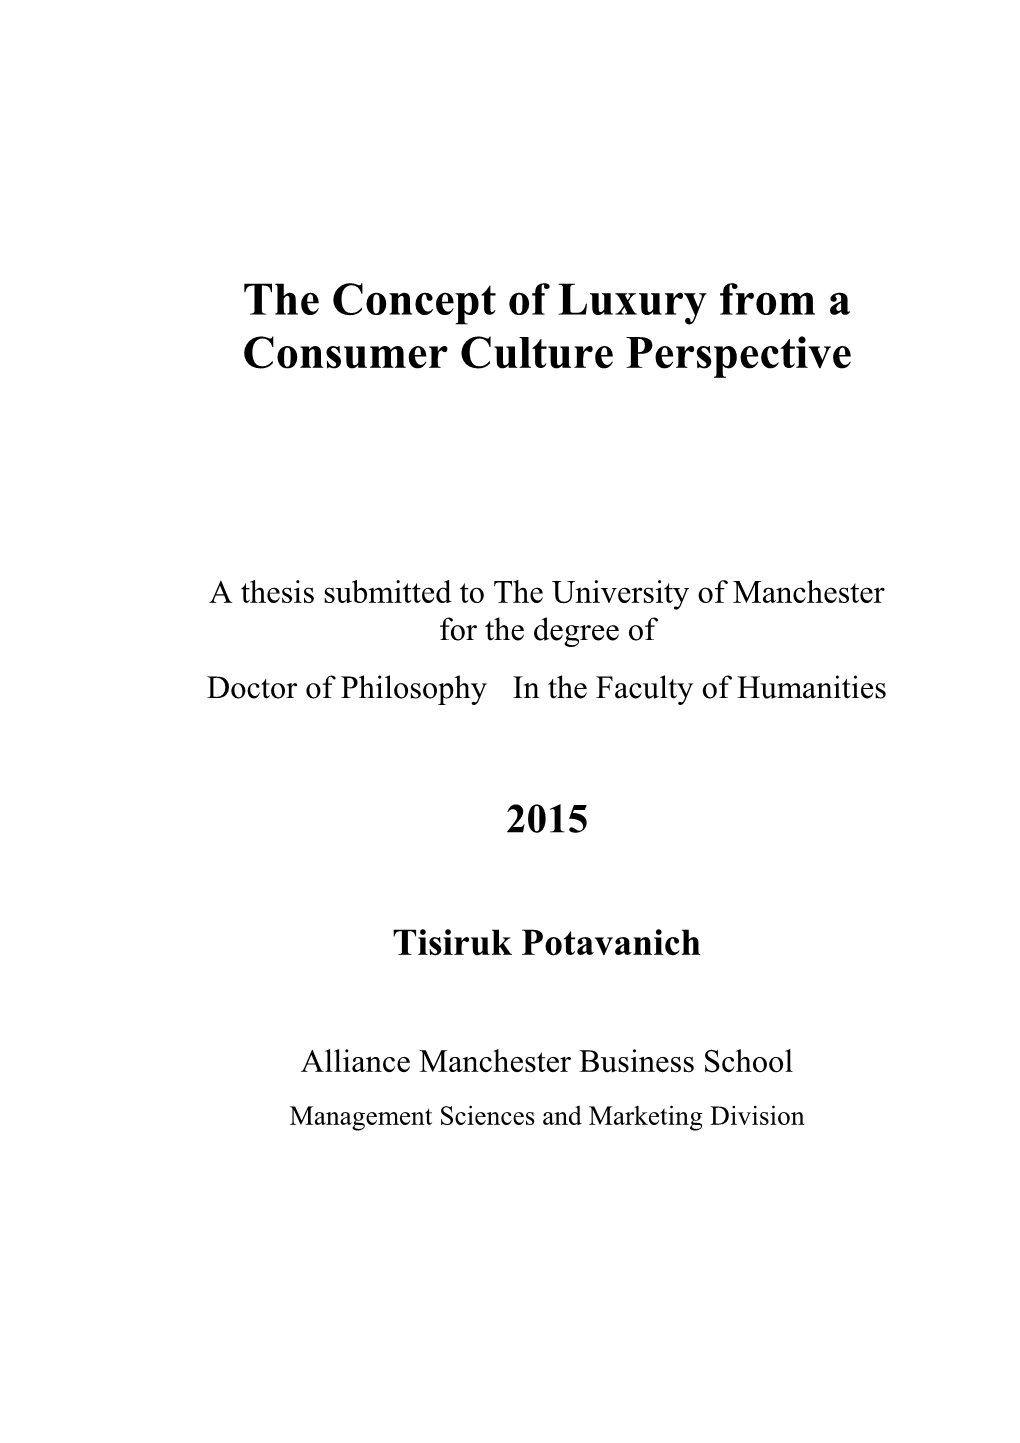 The Concept of Luxury from a Consumer Culture Perspective 2015